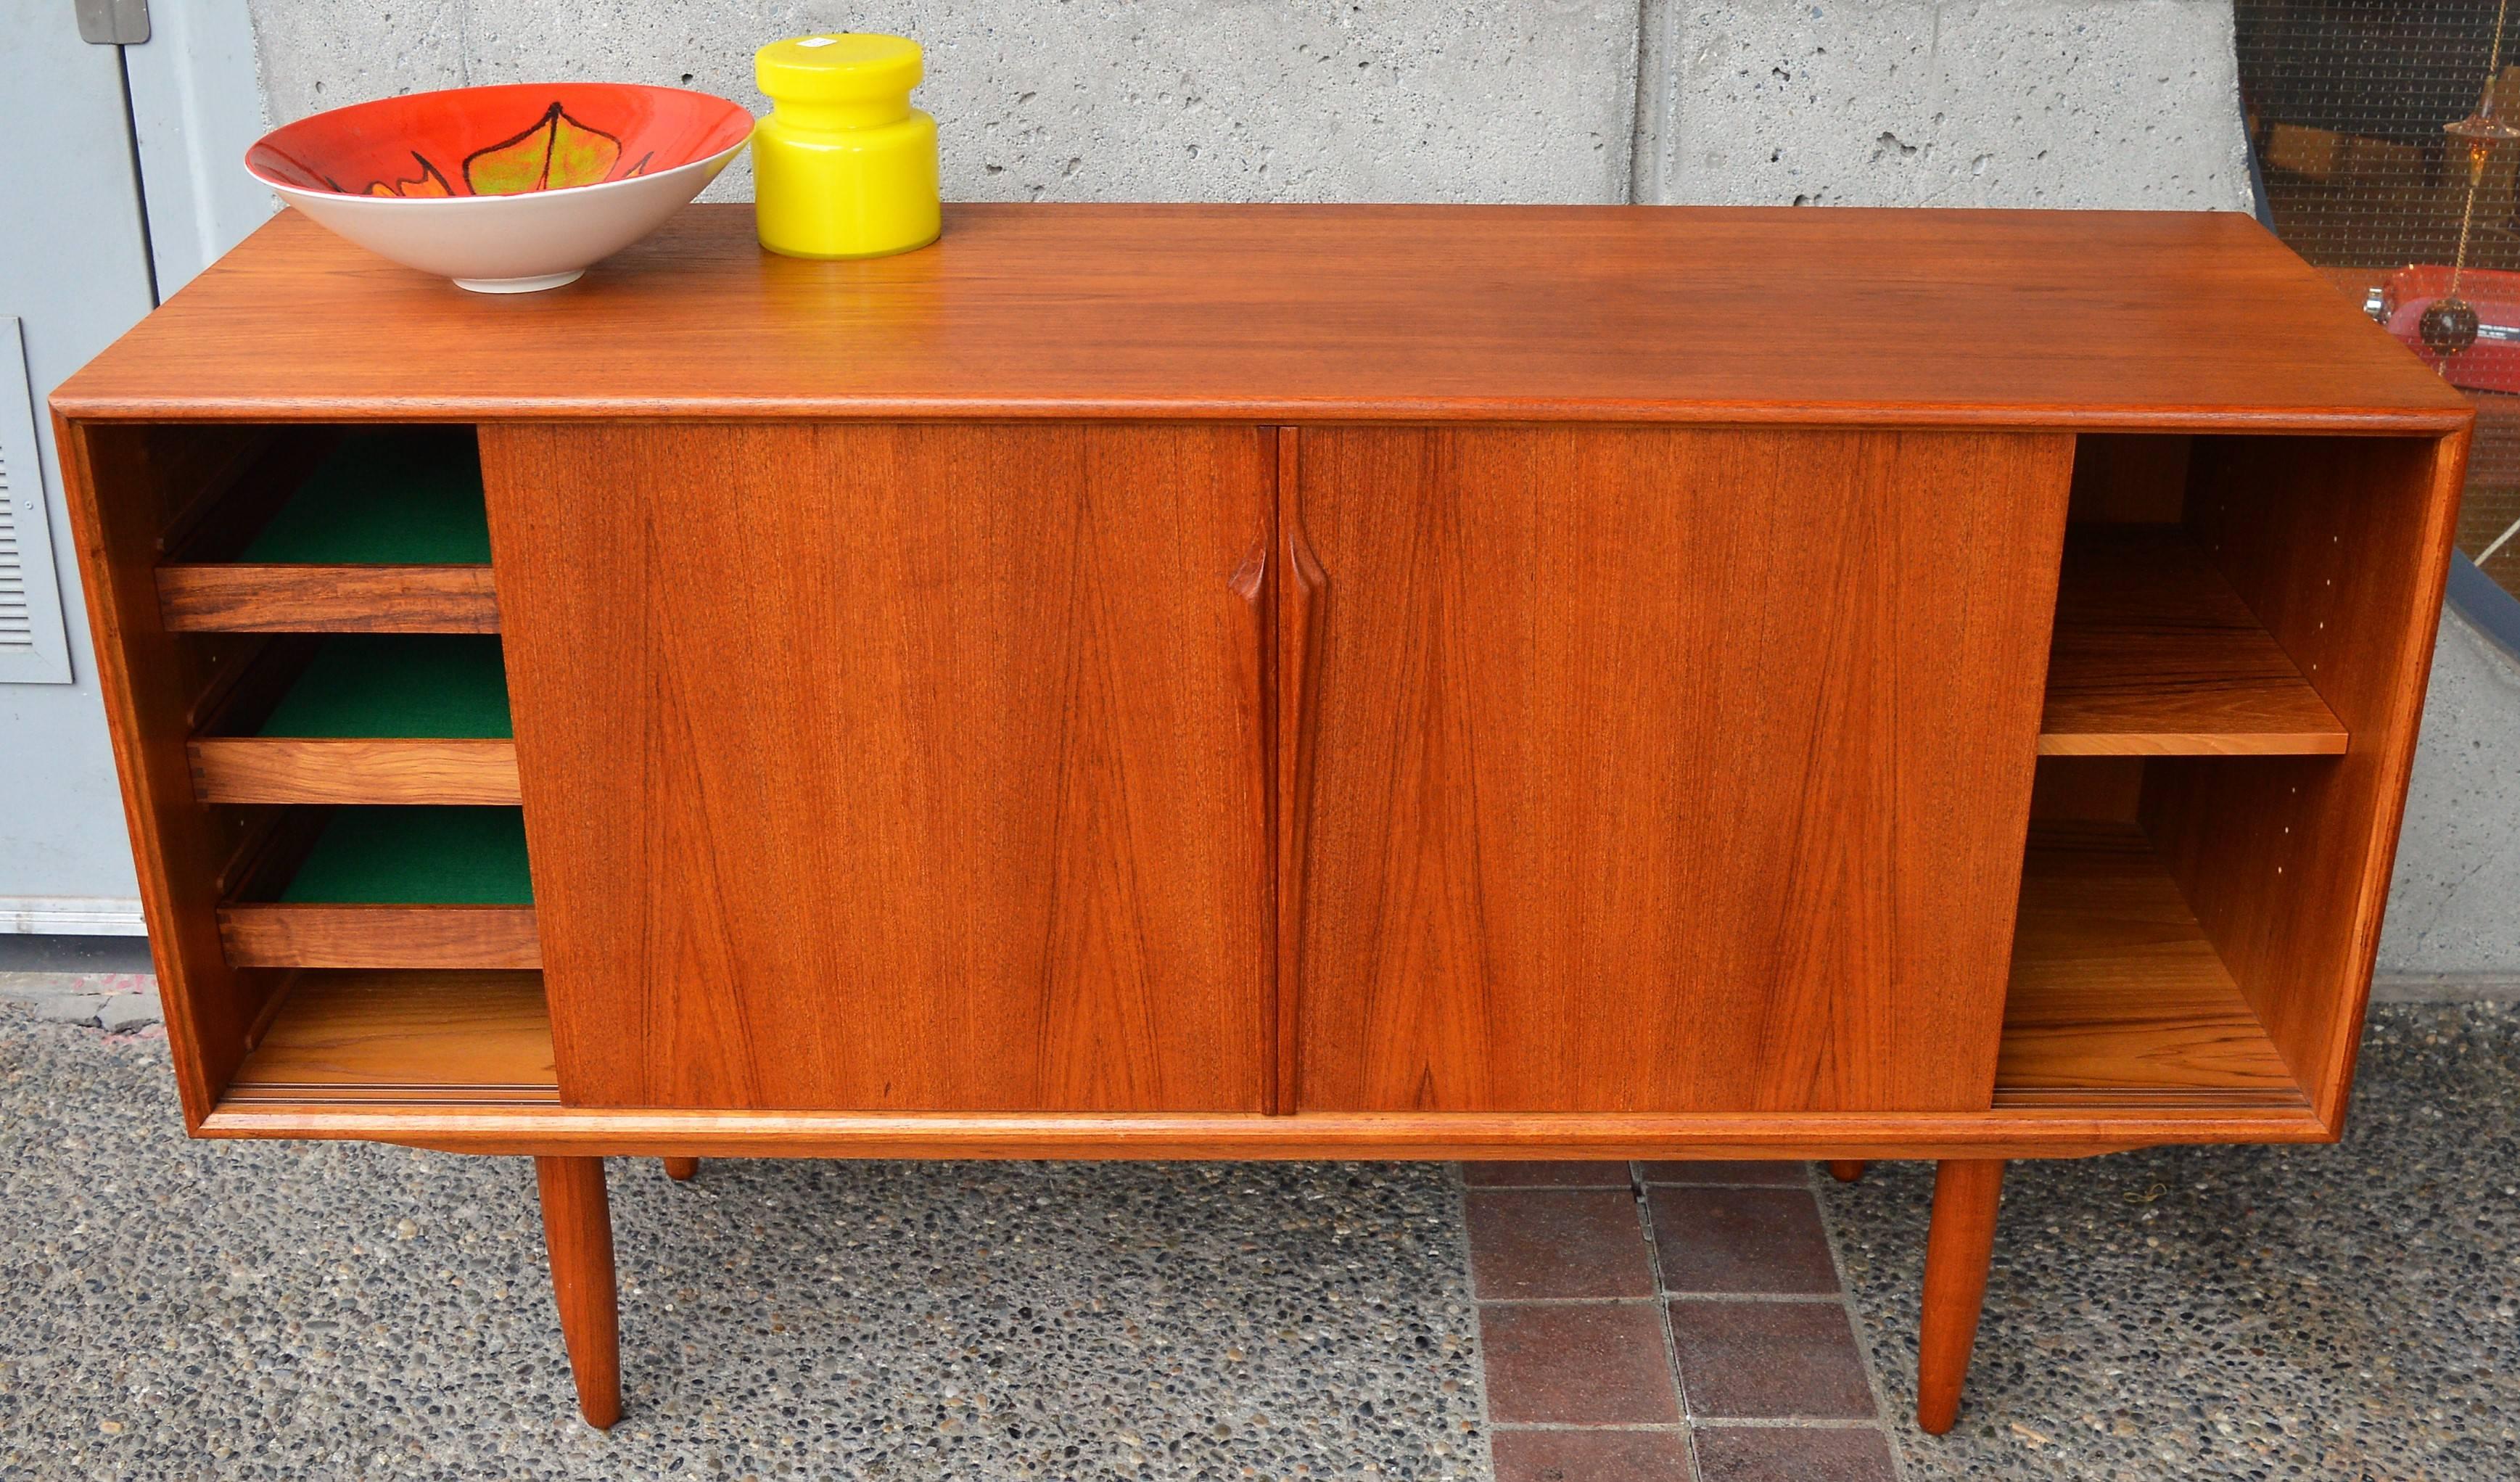 This stunning Danish Modern teak mid-sized credenza / buffet was designed by Gunni Oman for Axel Christensen in the 1960s. I adore the intricately carved door pulls! Featuring a lovely wood tone, with book marked veneers on the doors. The interior